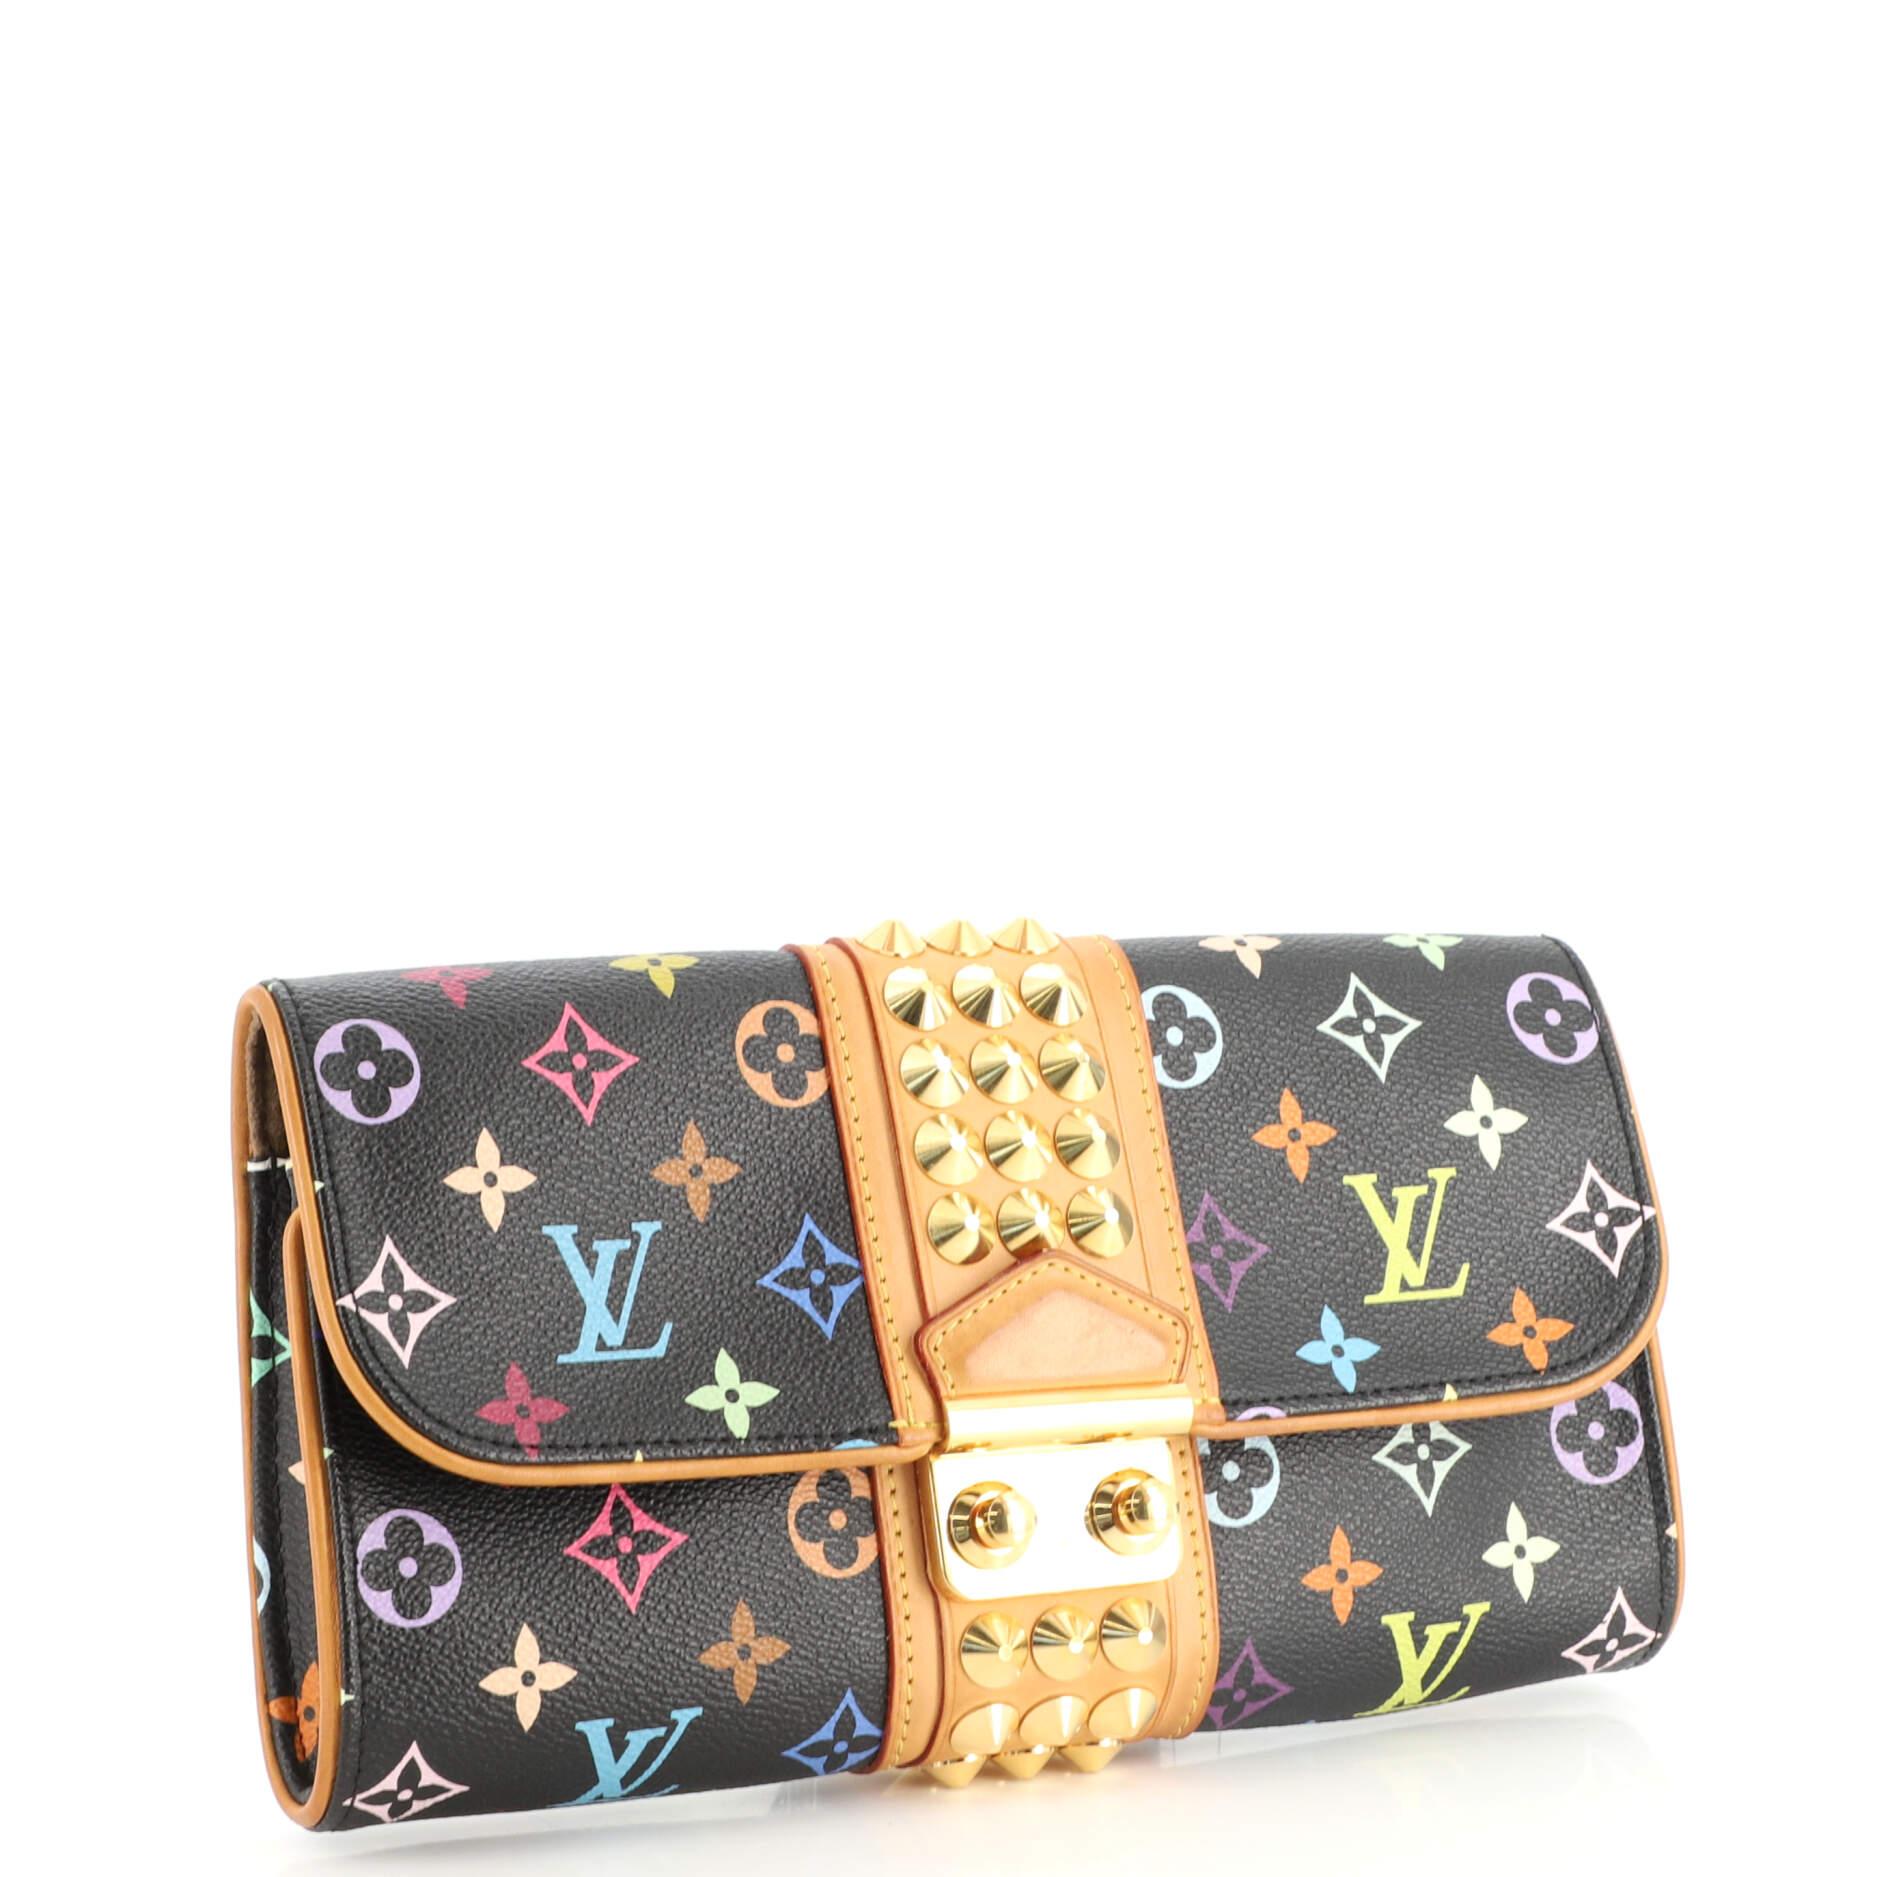 Louis Vuitton Courtney - For Sale on 1stDibs  louis vuitton courtney clutch,  lv courtney, louis vuitton courtney bag